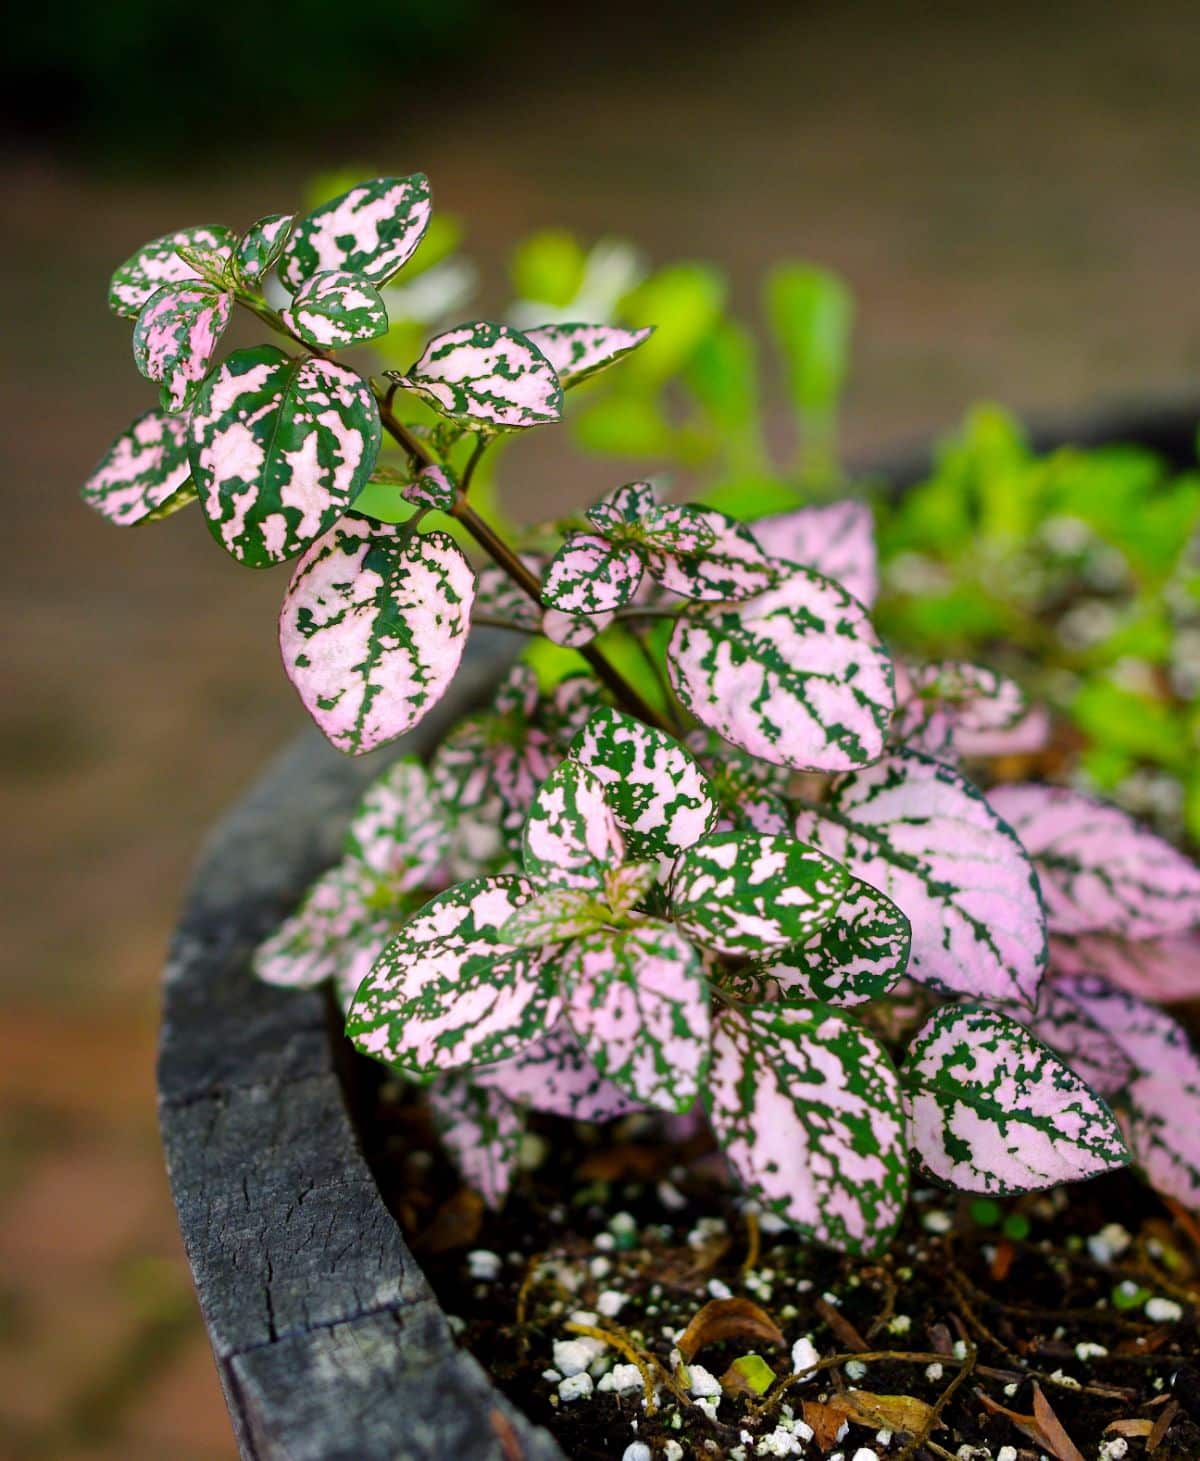 A polka dot plant with pink-green foliage in a pot.